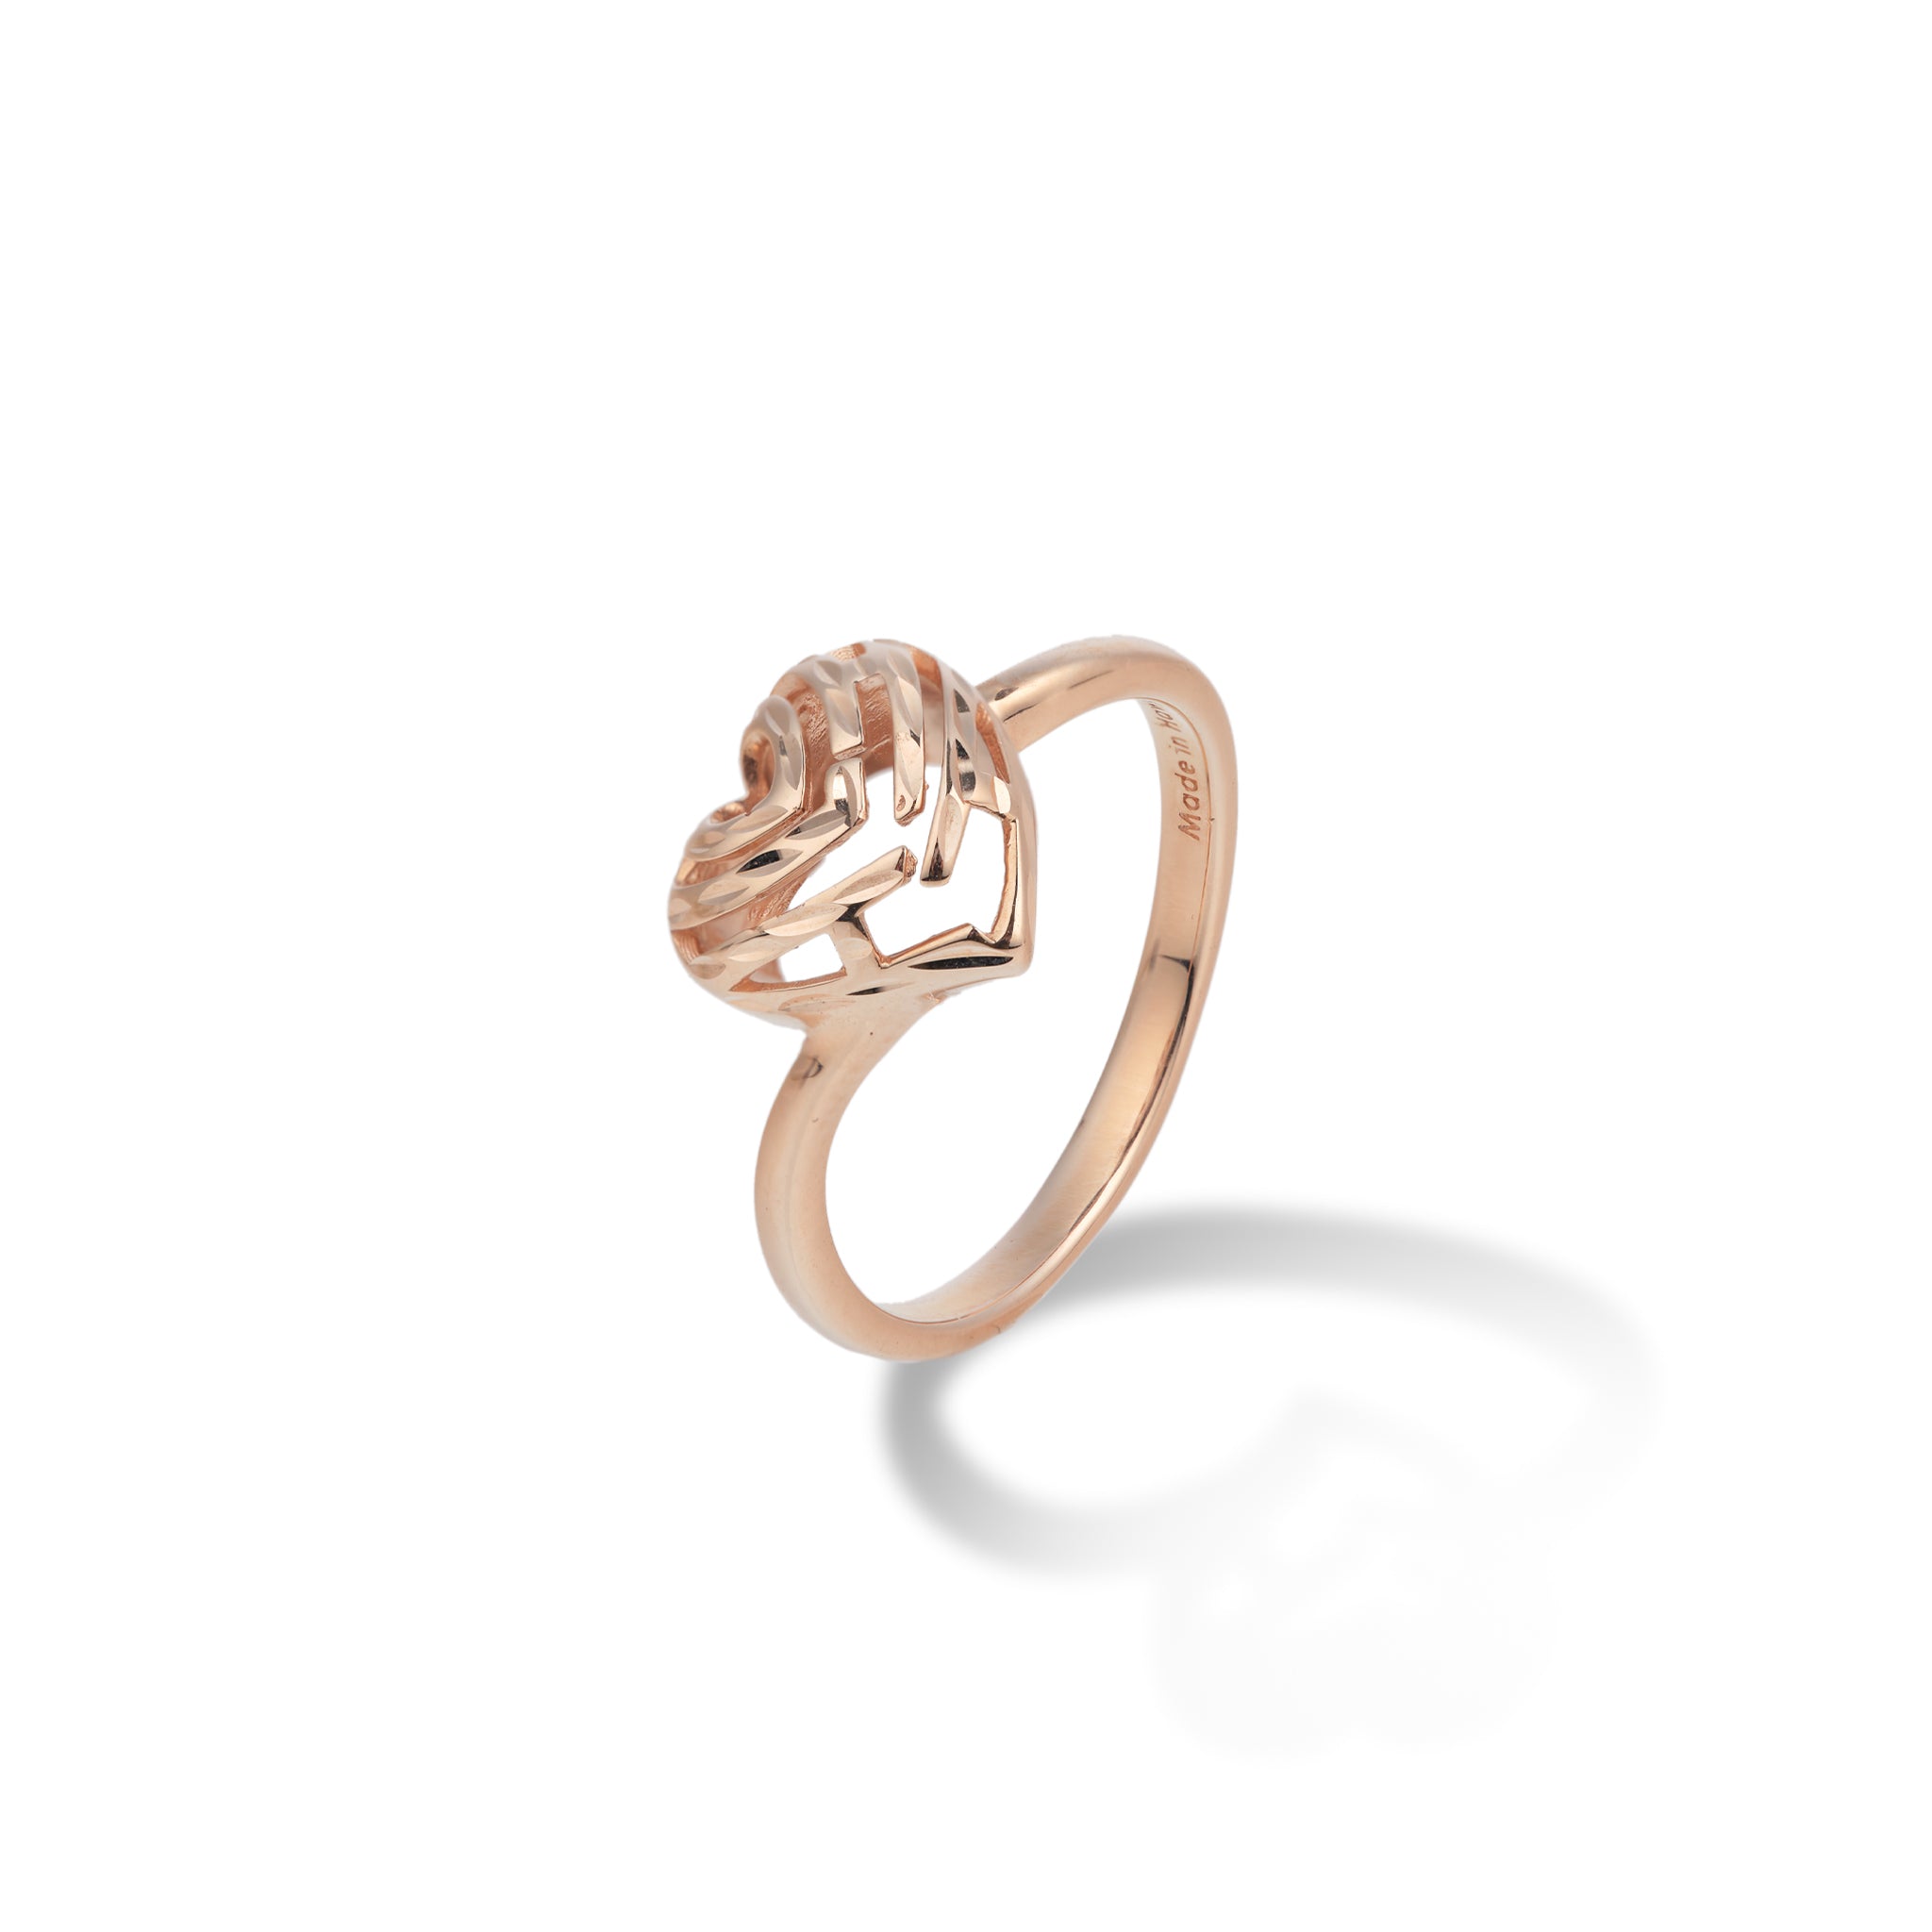 Aloha Heart Ring in Rose Gold - 11mm